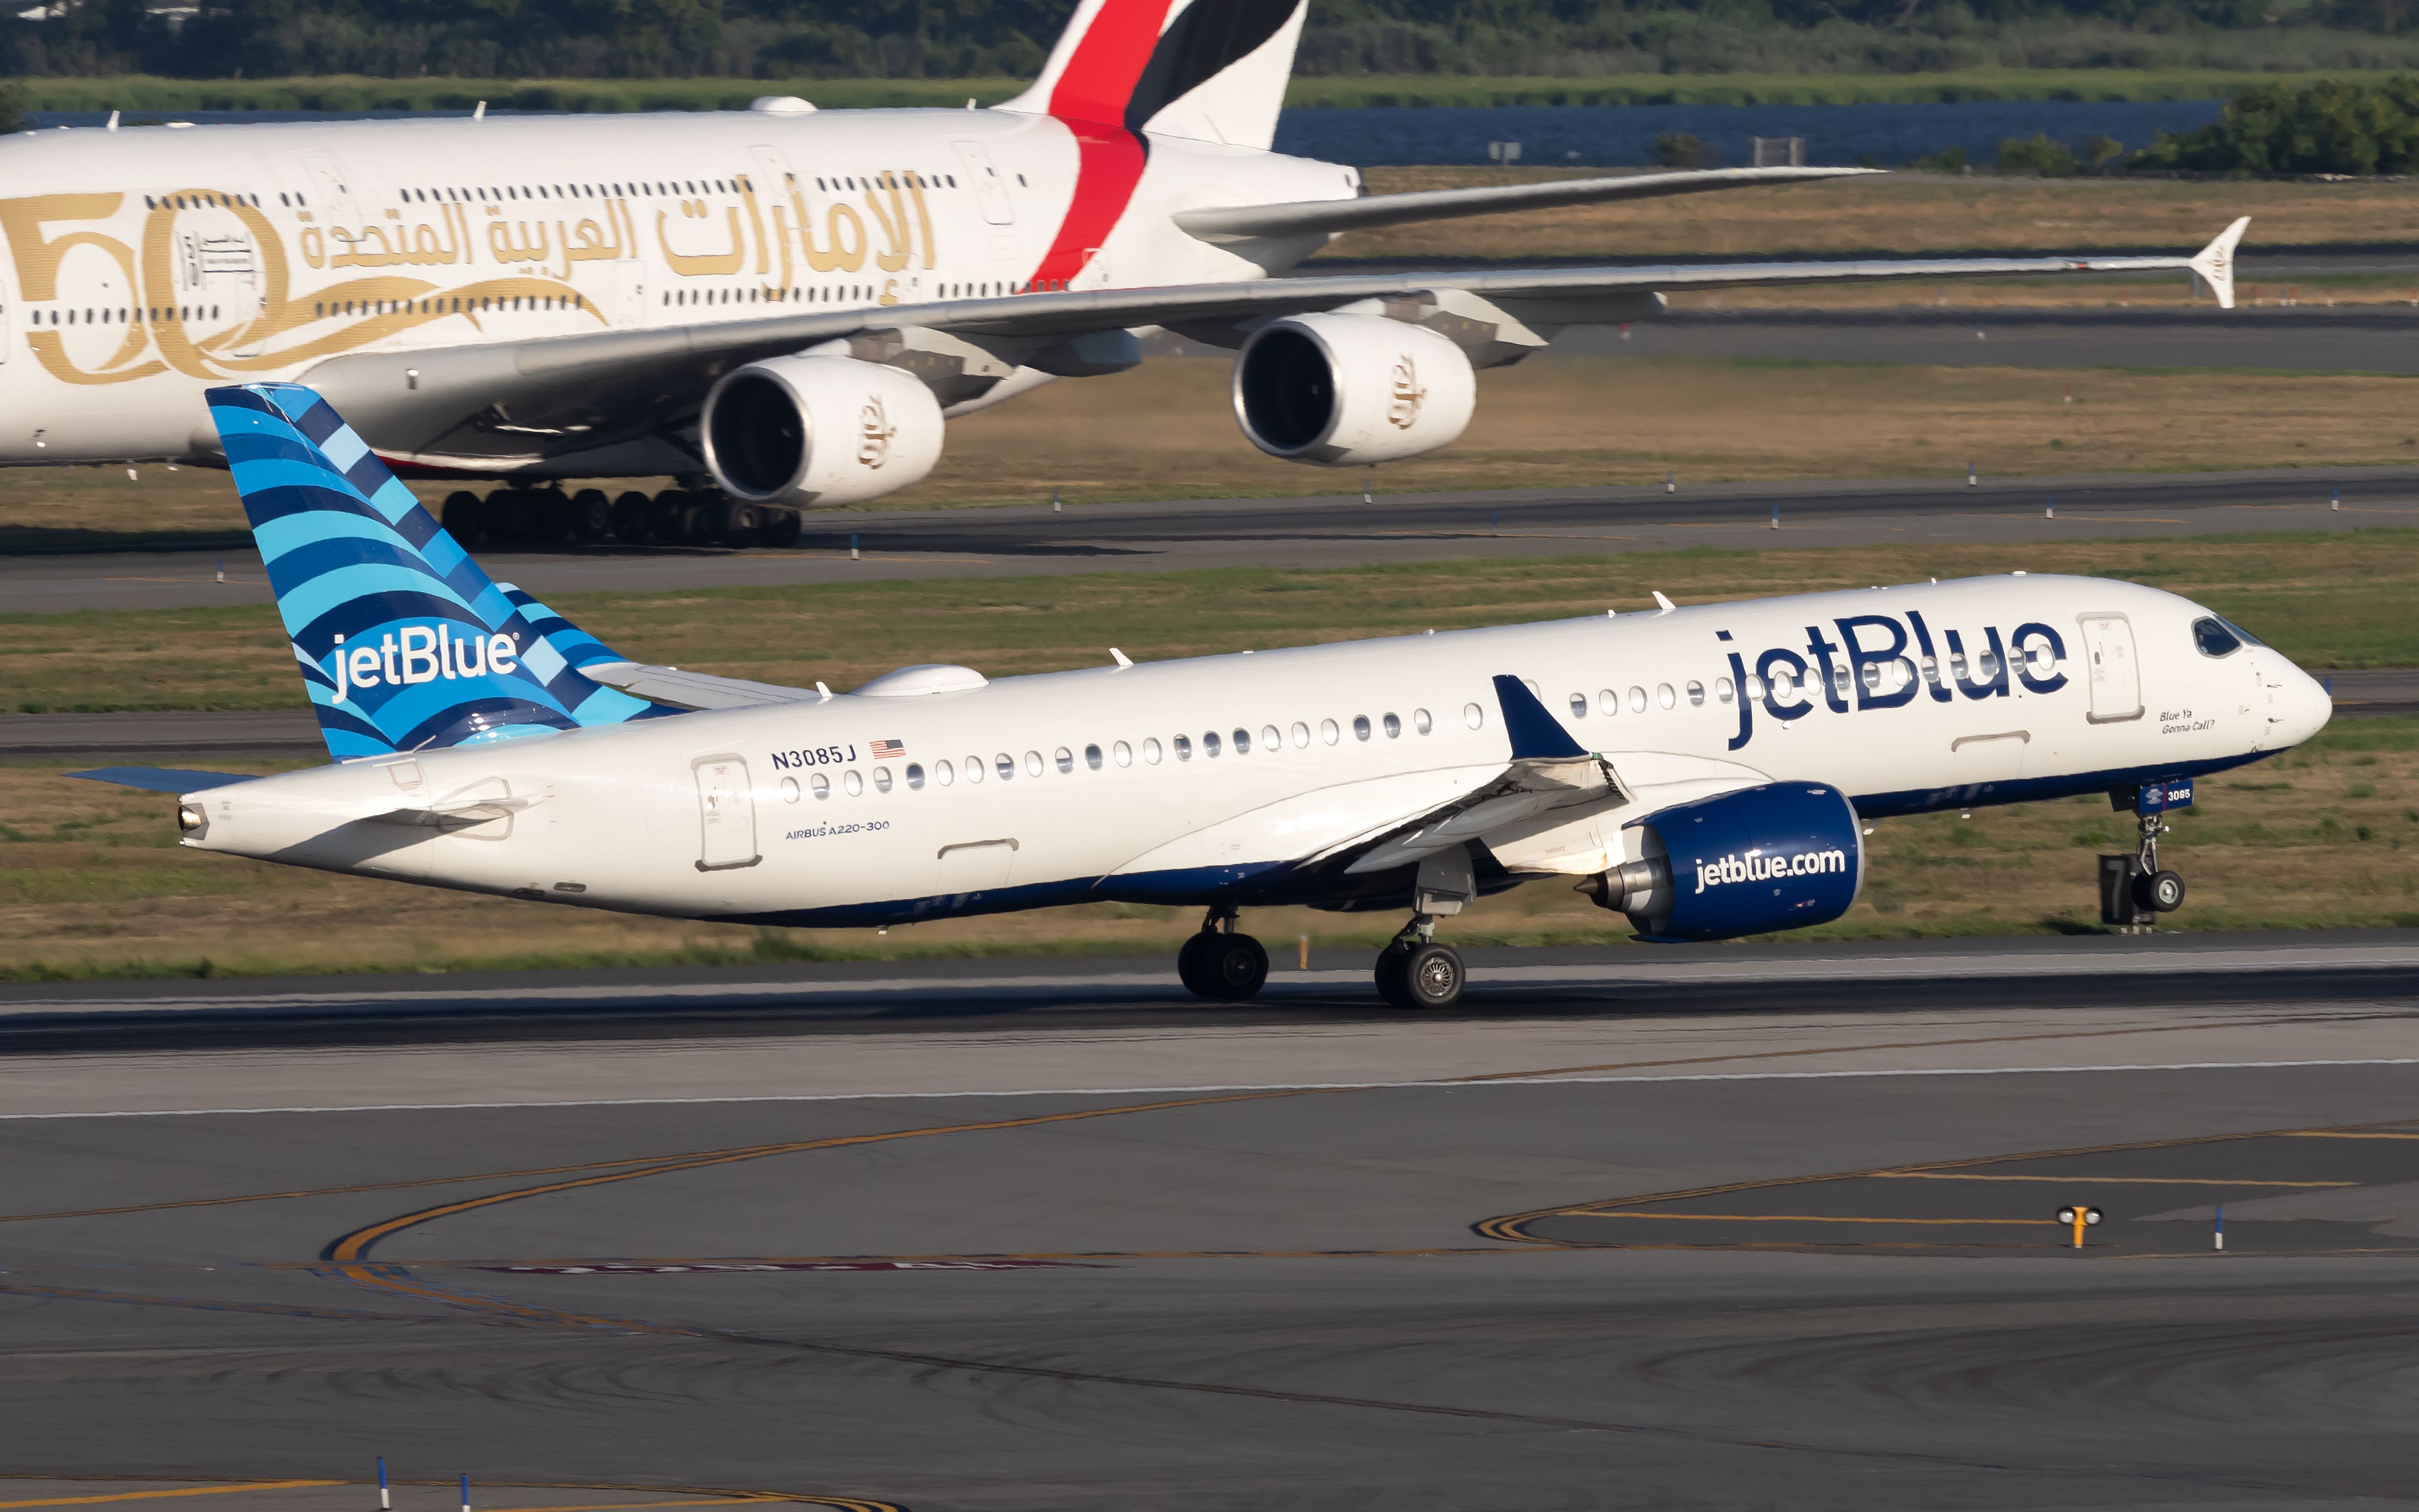 A jetBlue Airbus A220-300 about to takeoff, while an Emirates A380 waits in the background.